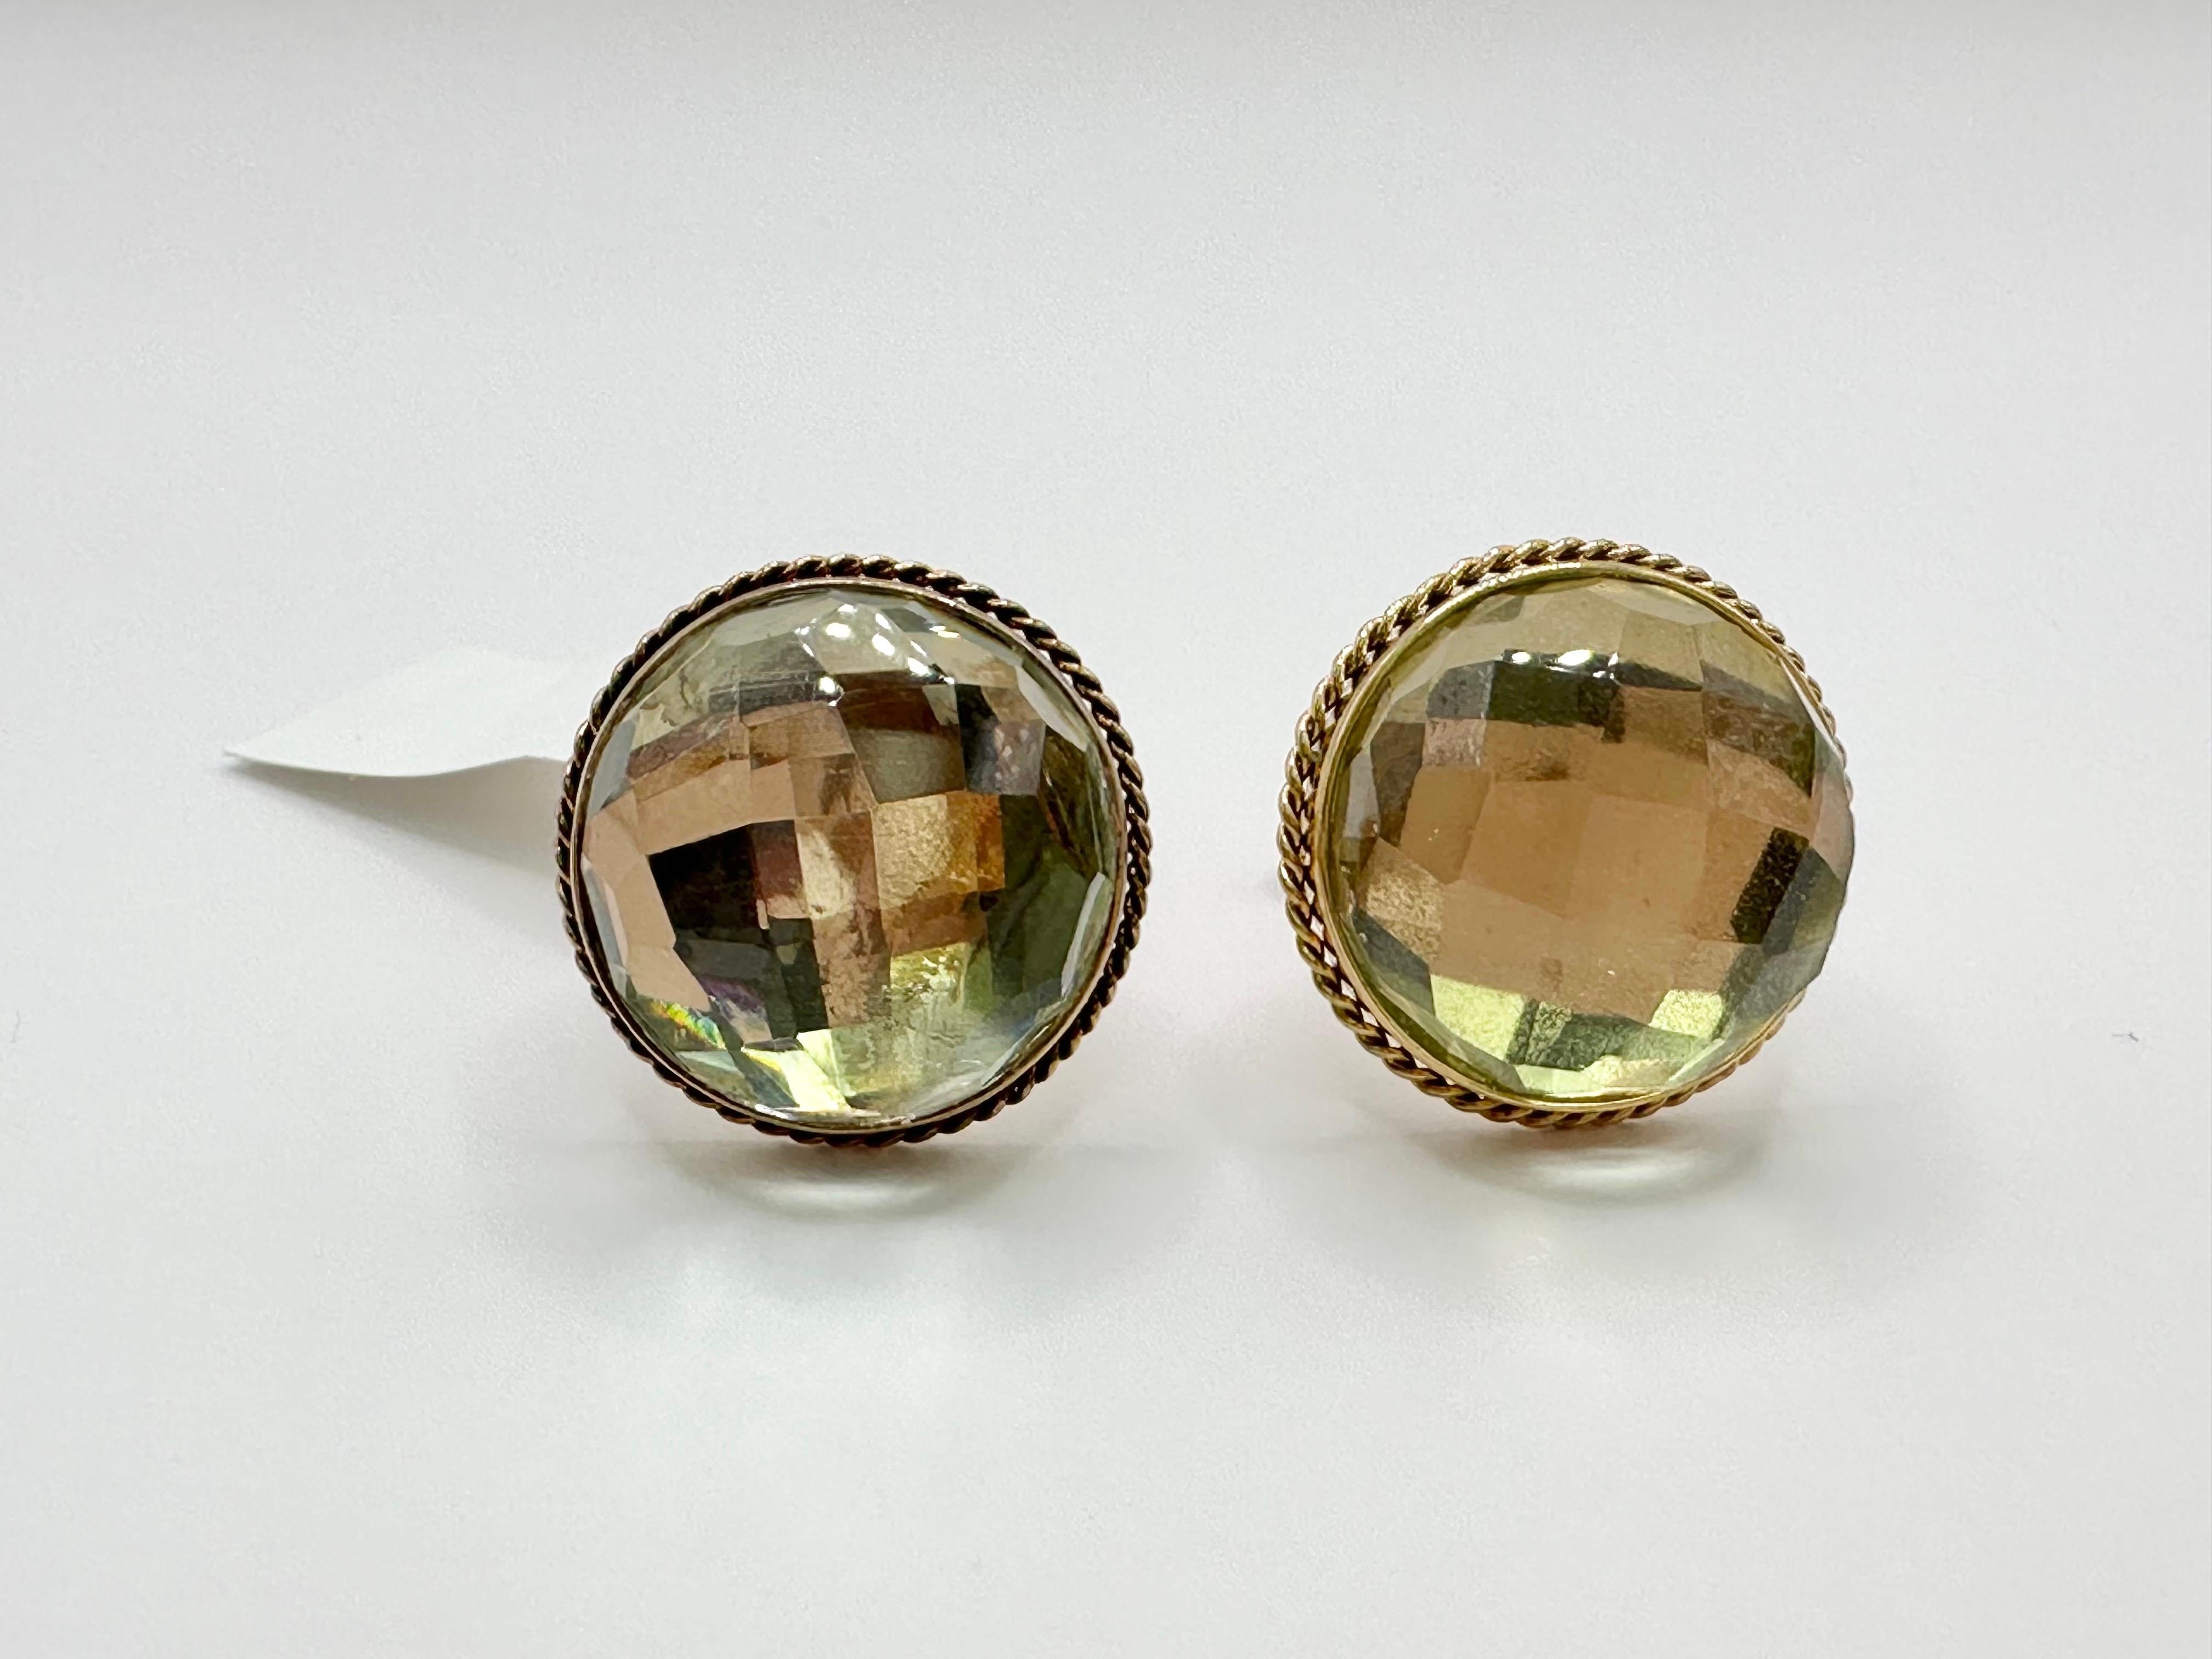 These are beautiful earthy mens cufflinks made with 14KT solid gold and natural lemon quartz gemstones, the gemtones are 100% custom cut! 

Certificate of authenticity comes with purchase!

ABOUT US
We are a family-owned business. Our studio in